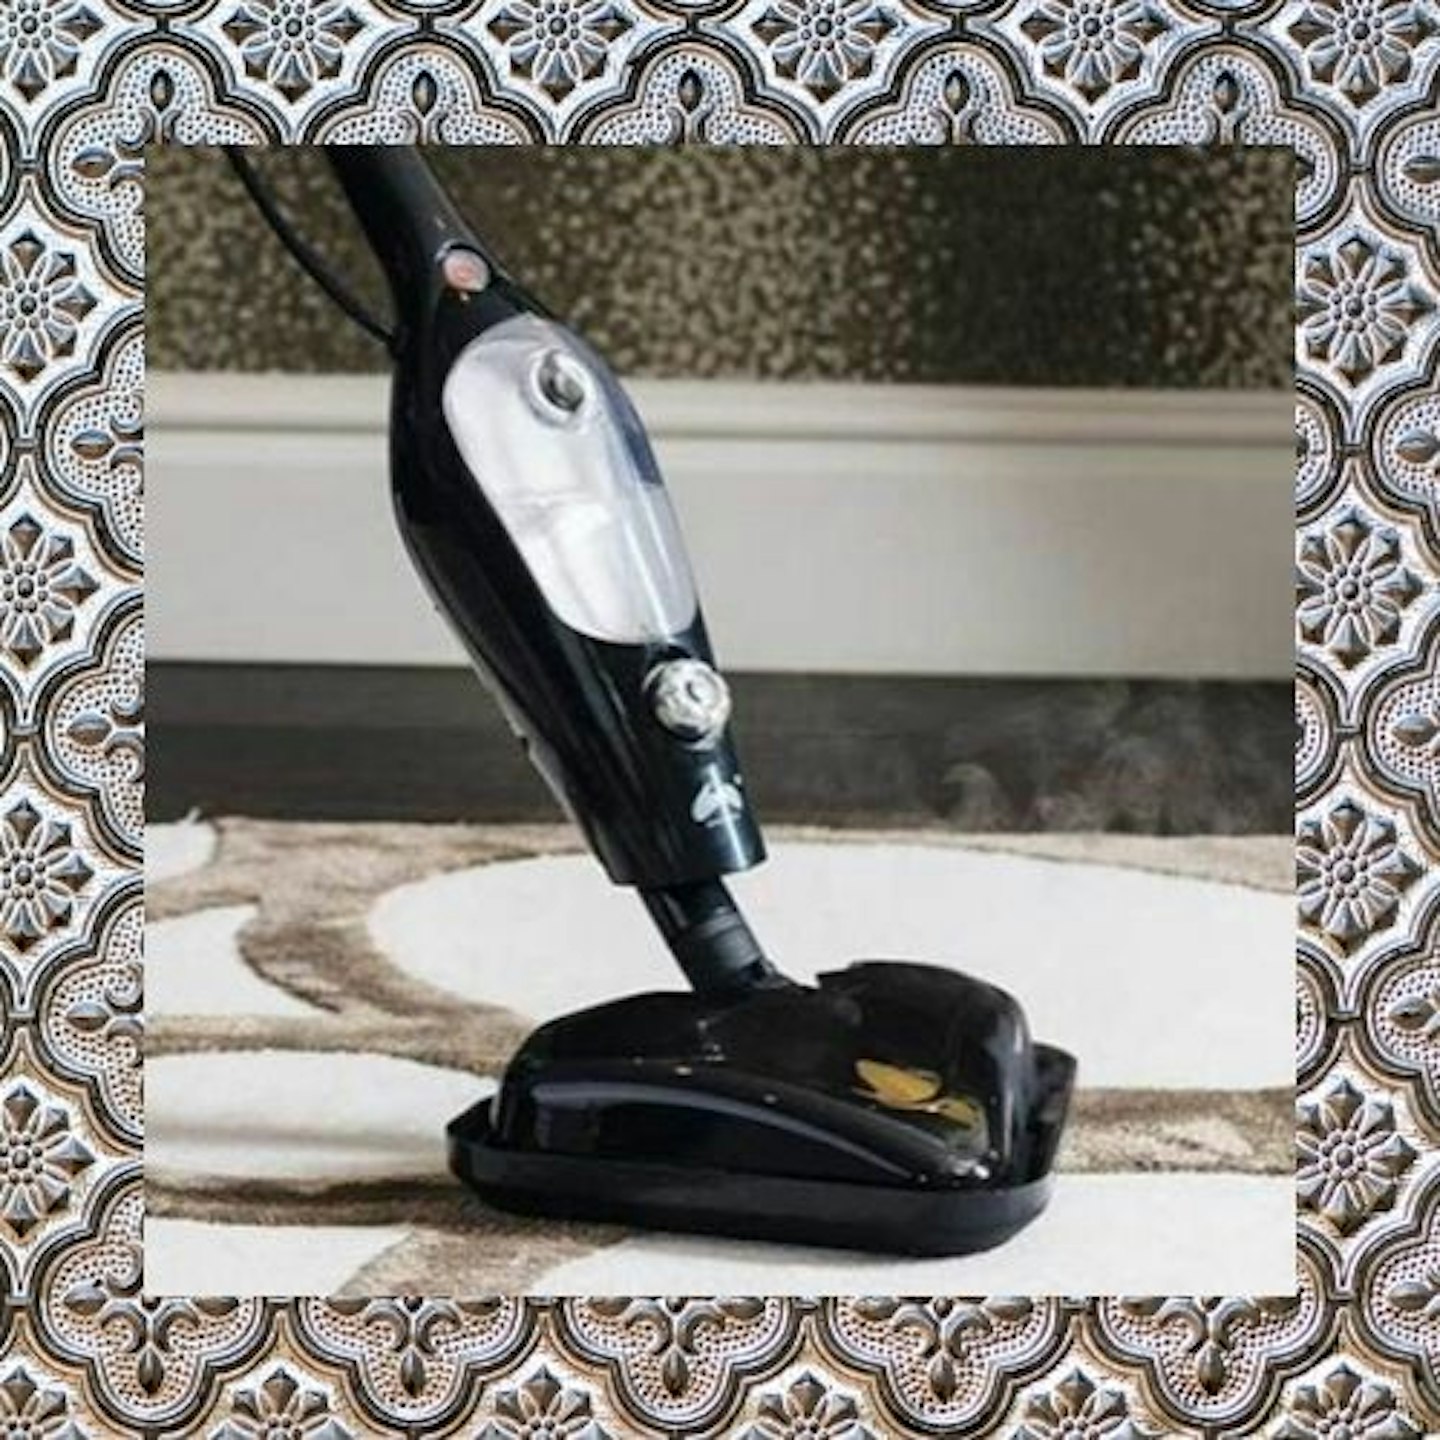 Ovation HT110 13-in-1 Multifunctional Steam Cleaner